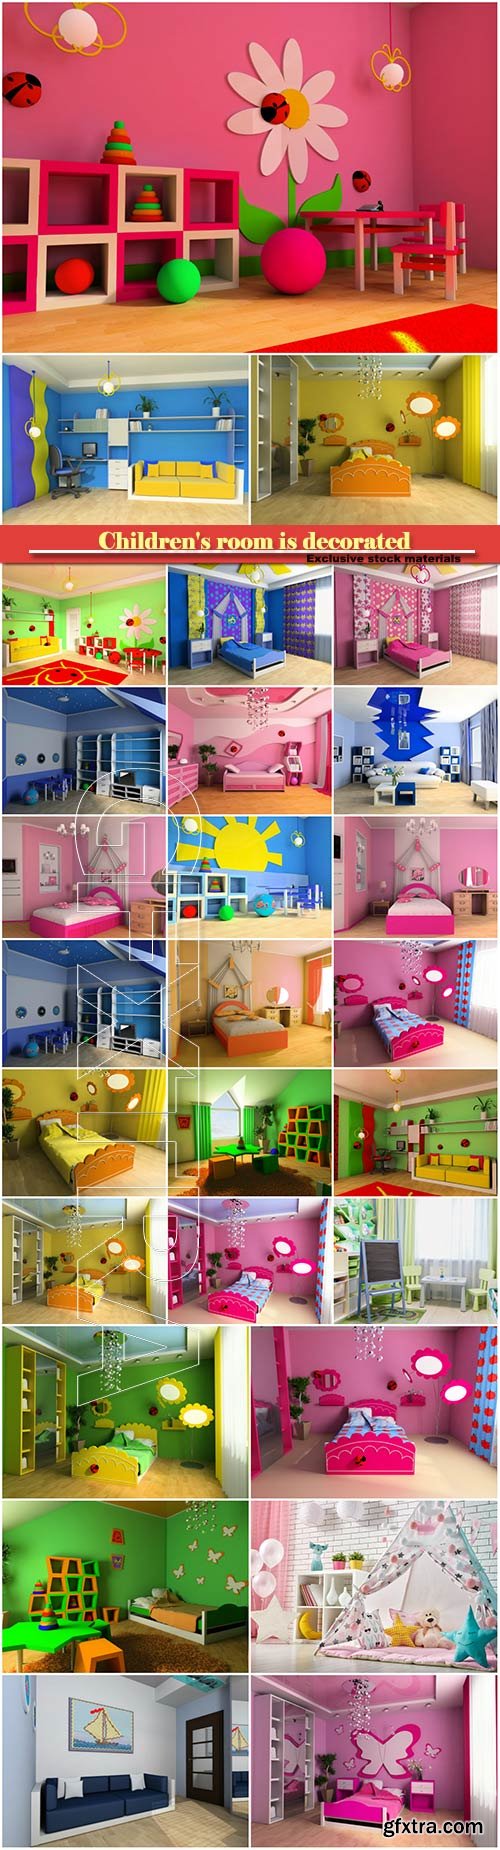 Children\'s room is decorated in pink, blue and green tones